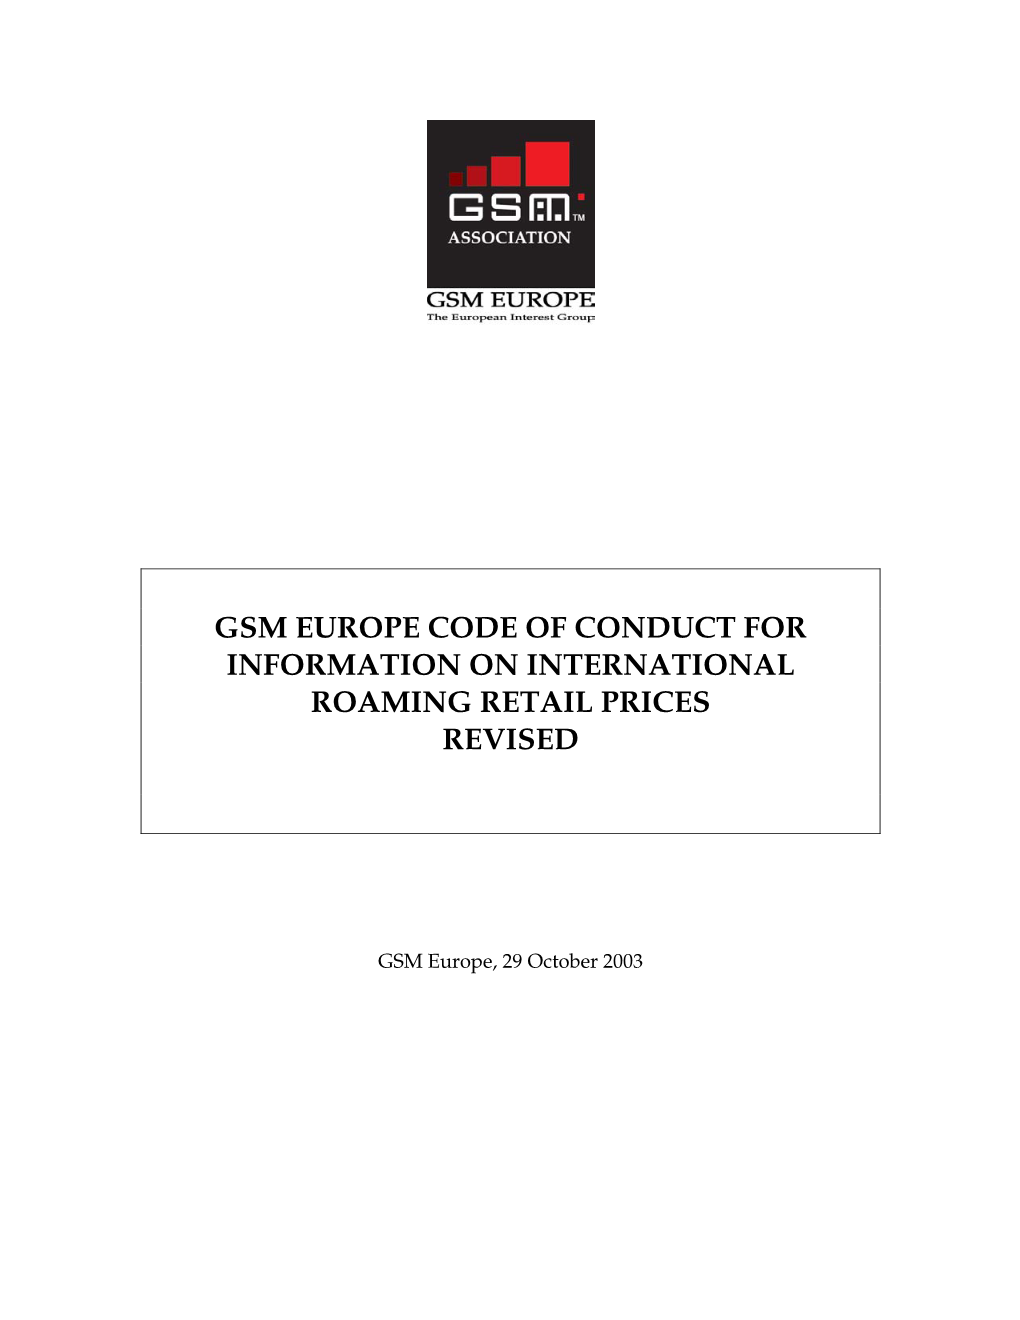 Gsm Europe Code of Conduct for Information on International Roaming Retail Prices Revised